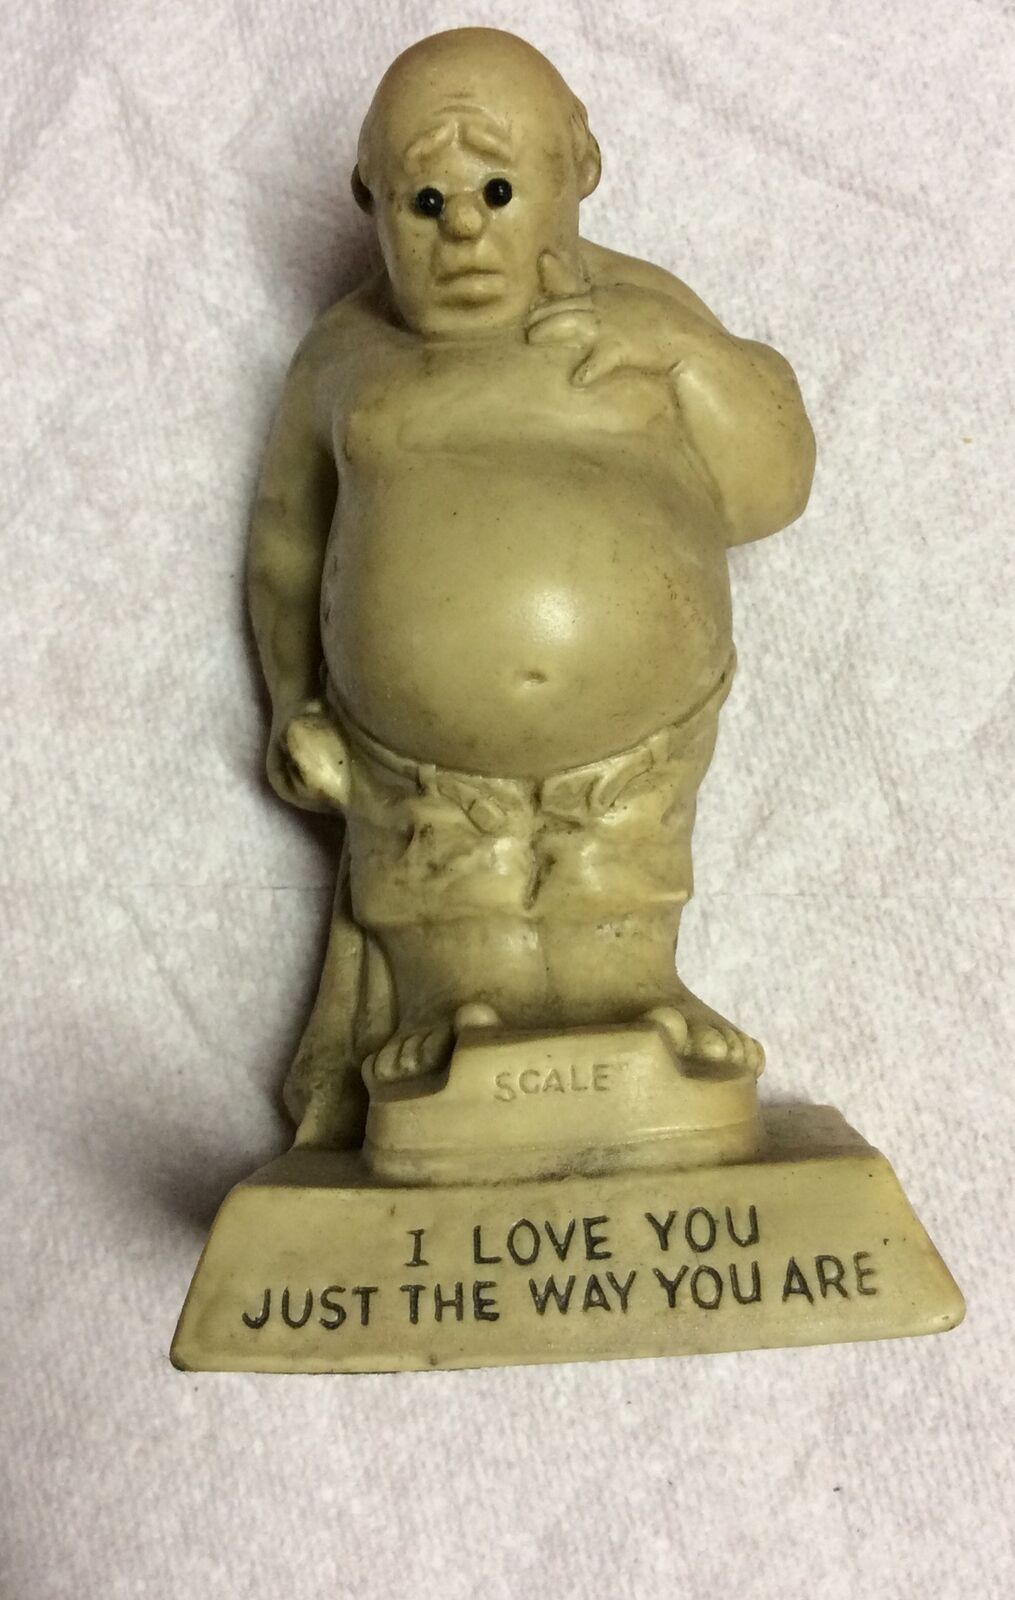 VTG R & W Berries Co. I love you just the way you are Man On Scale Figurine 1970